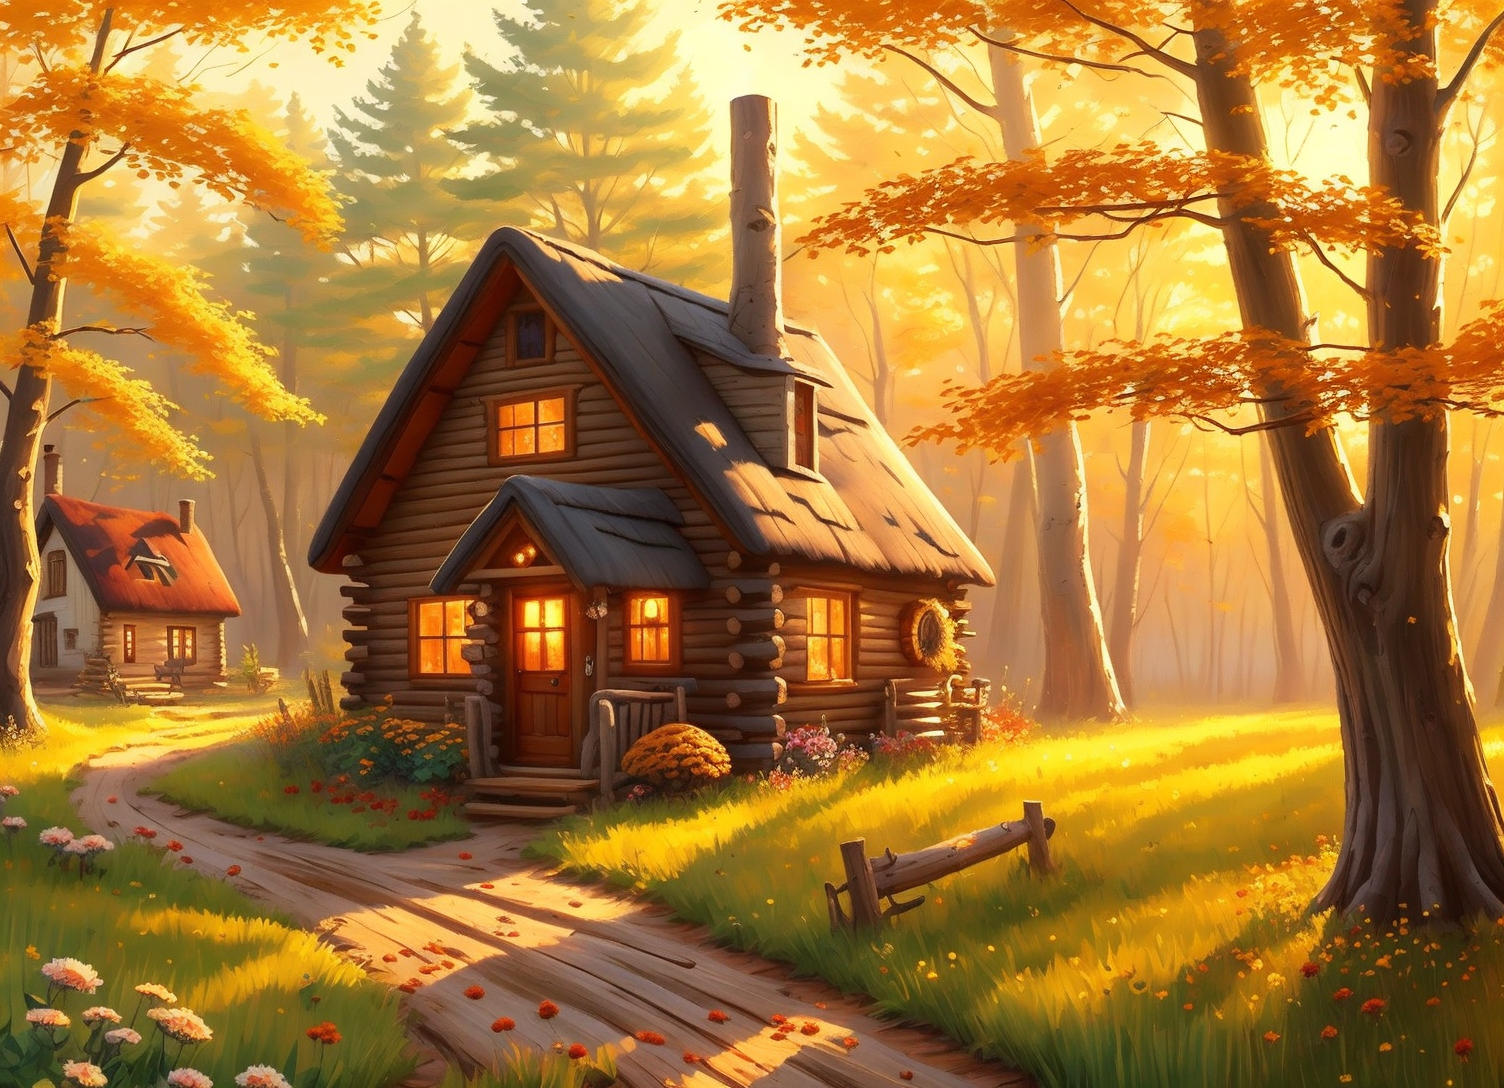 painting of a cute cozy cottagecore wood log cottage on a golden field, soft warm sunlight, tree, soft autumn colors, flow...